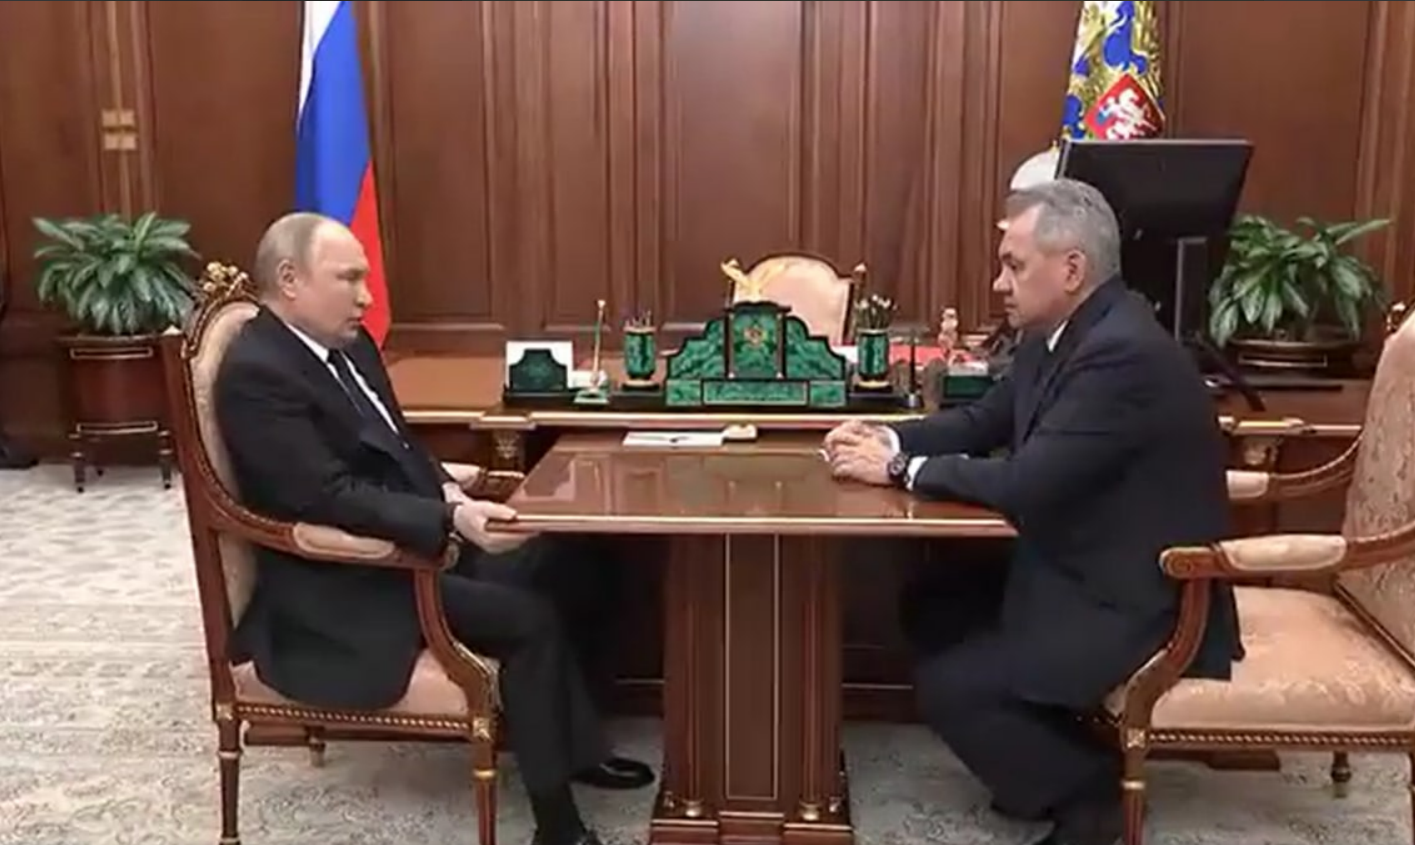 “Putin will not let Ukrainian nazis, banderivtsi and drug addicts to capture his table”. Putin’s meeting with Shoigu gave some food for creative thought as new memes emerged in the media